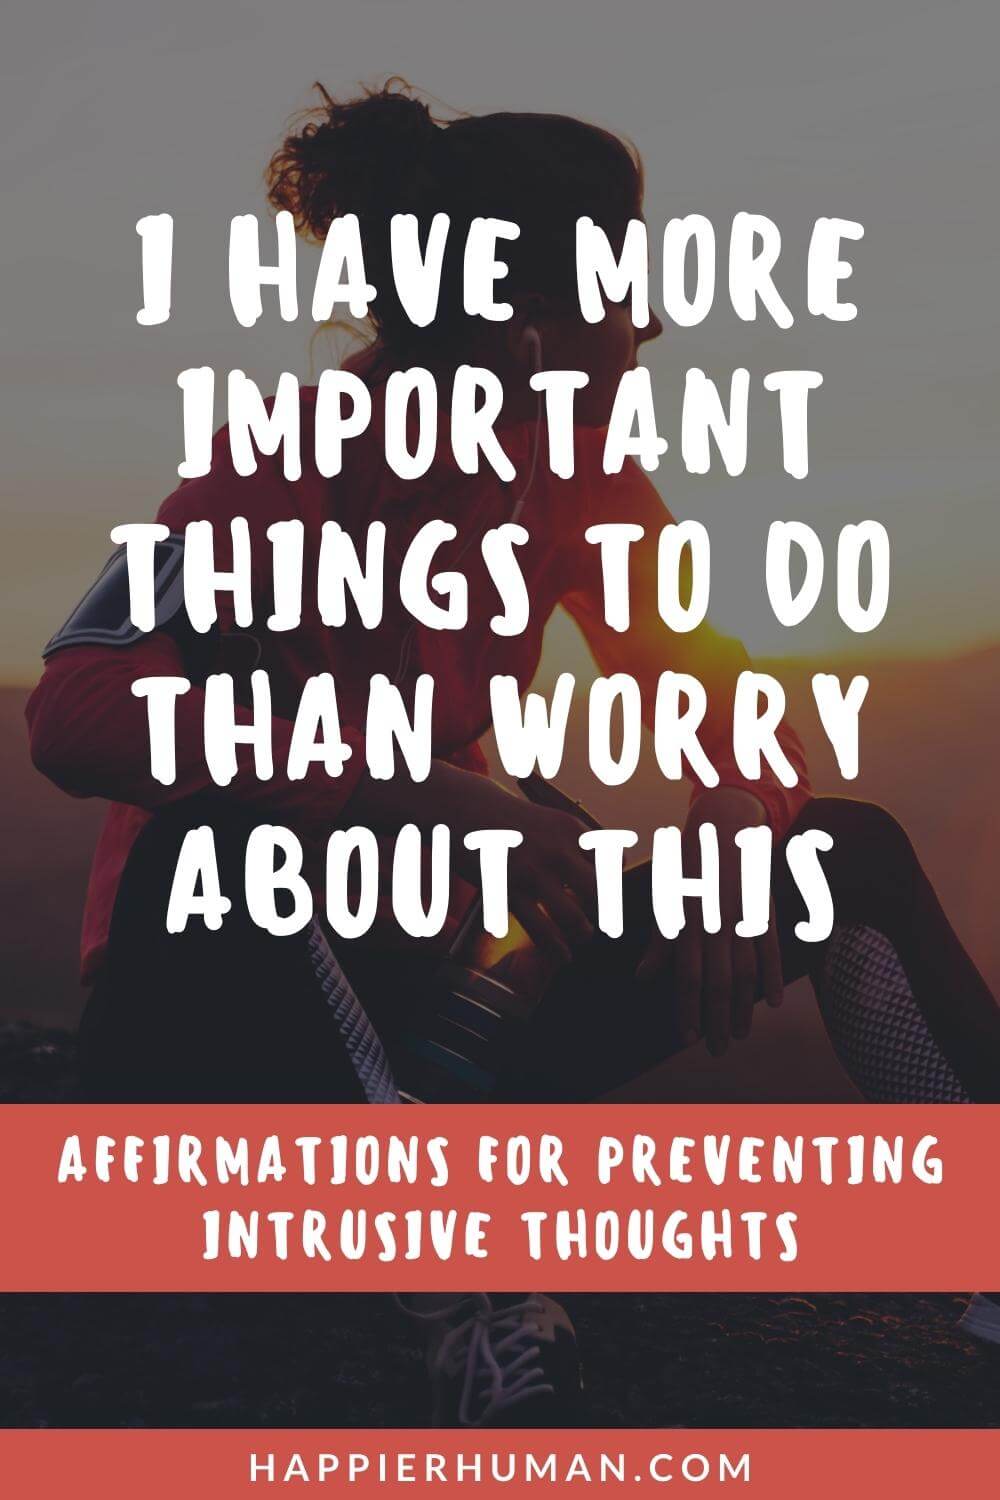 Affirmations for Intrusive Thoughts - I have more important things to do than worry about this | affirmations for rumination | morning affirmations for ocd | affirmations for health anxiety